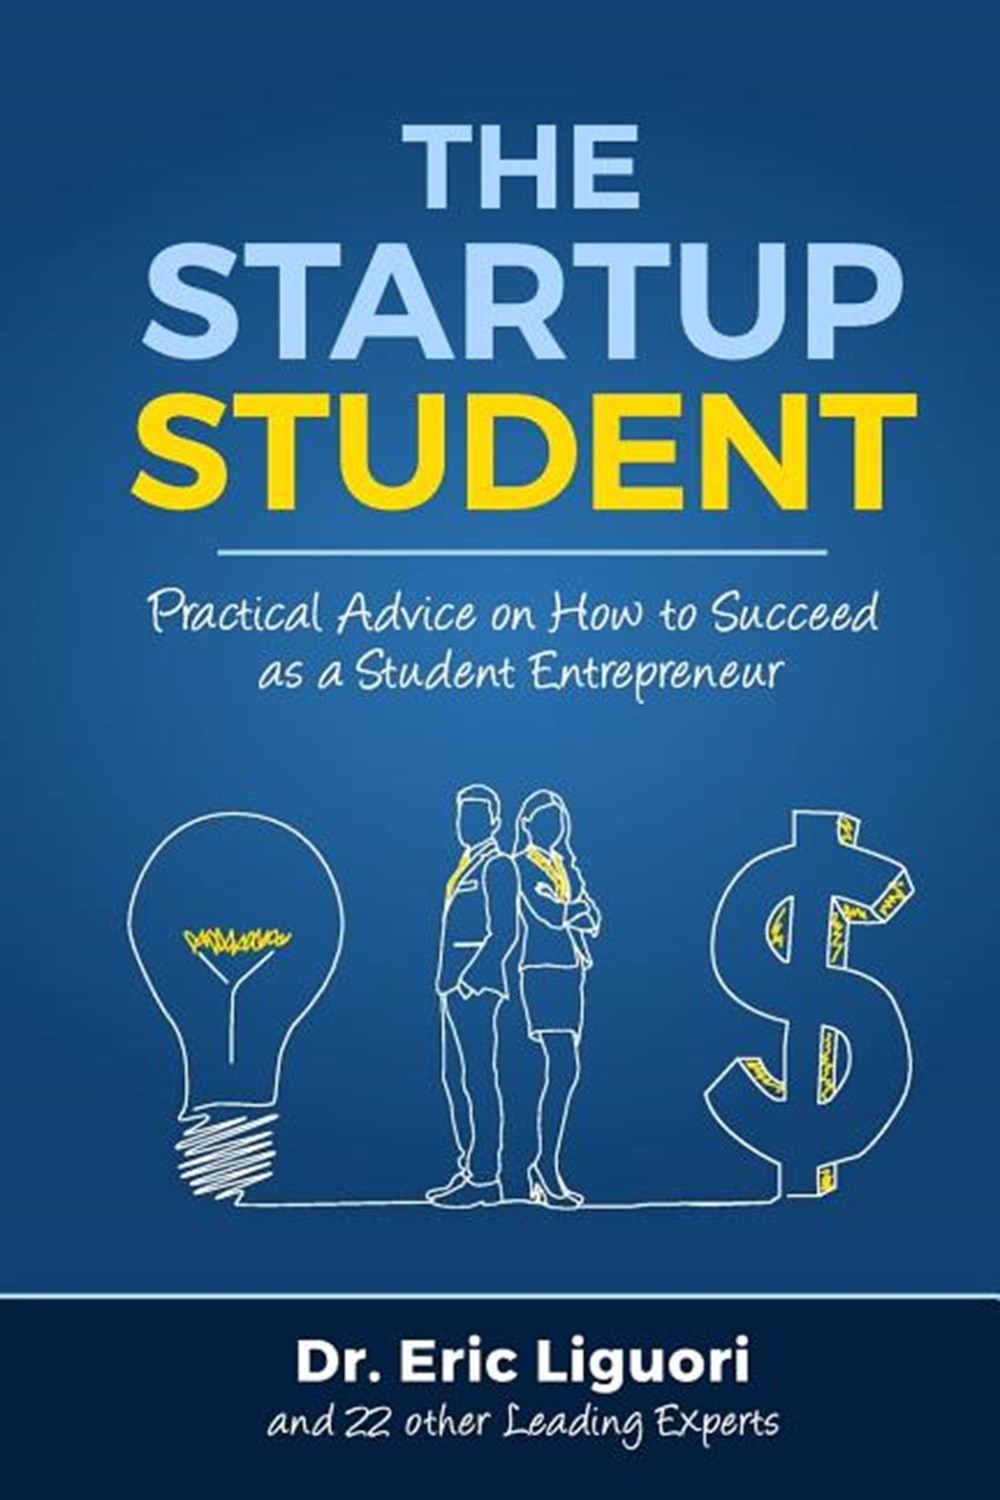 Startup Student: Practical Advice on How to Succeed as a Student Entrepreneur